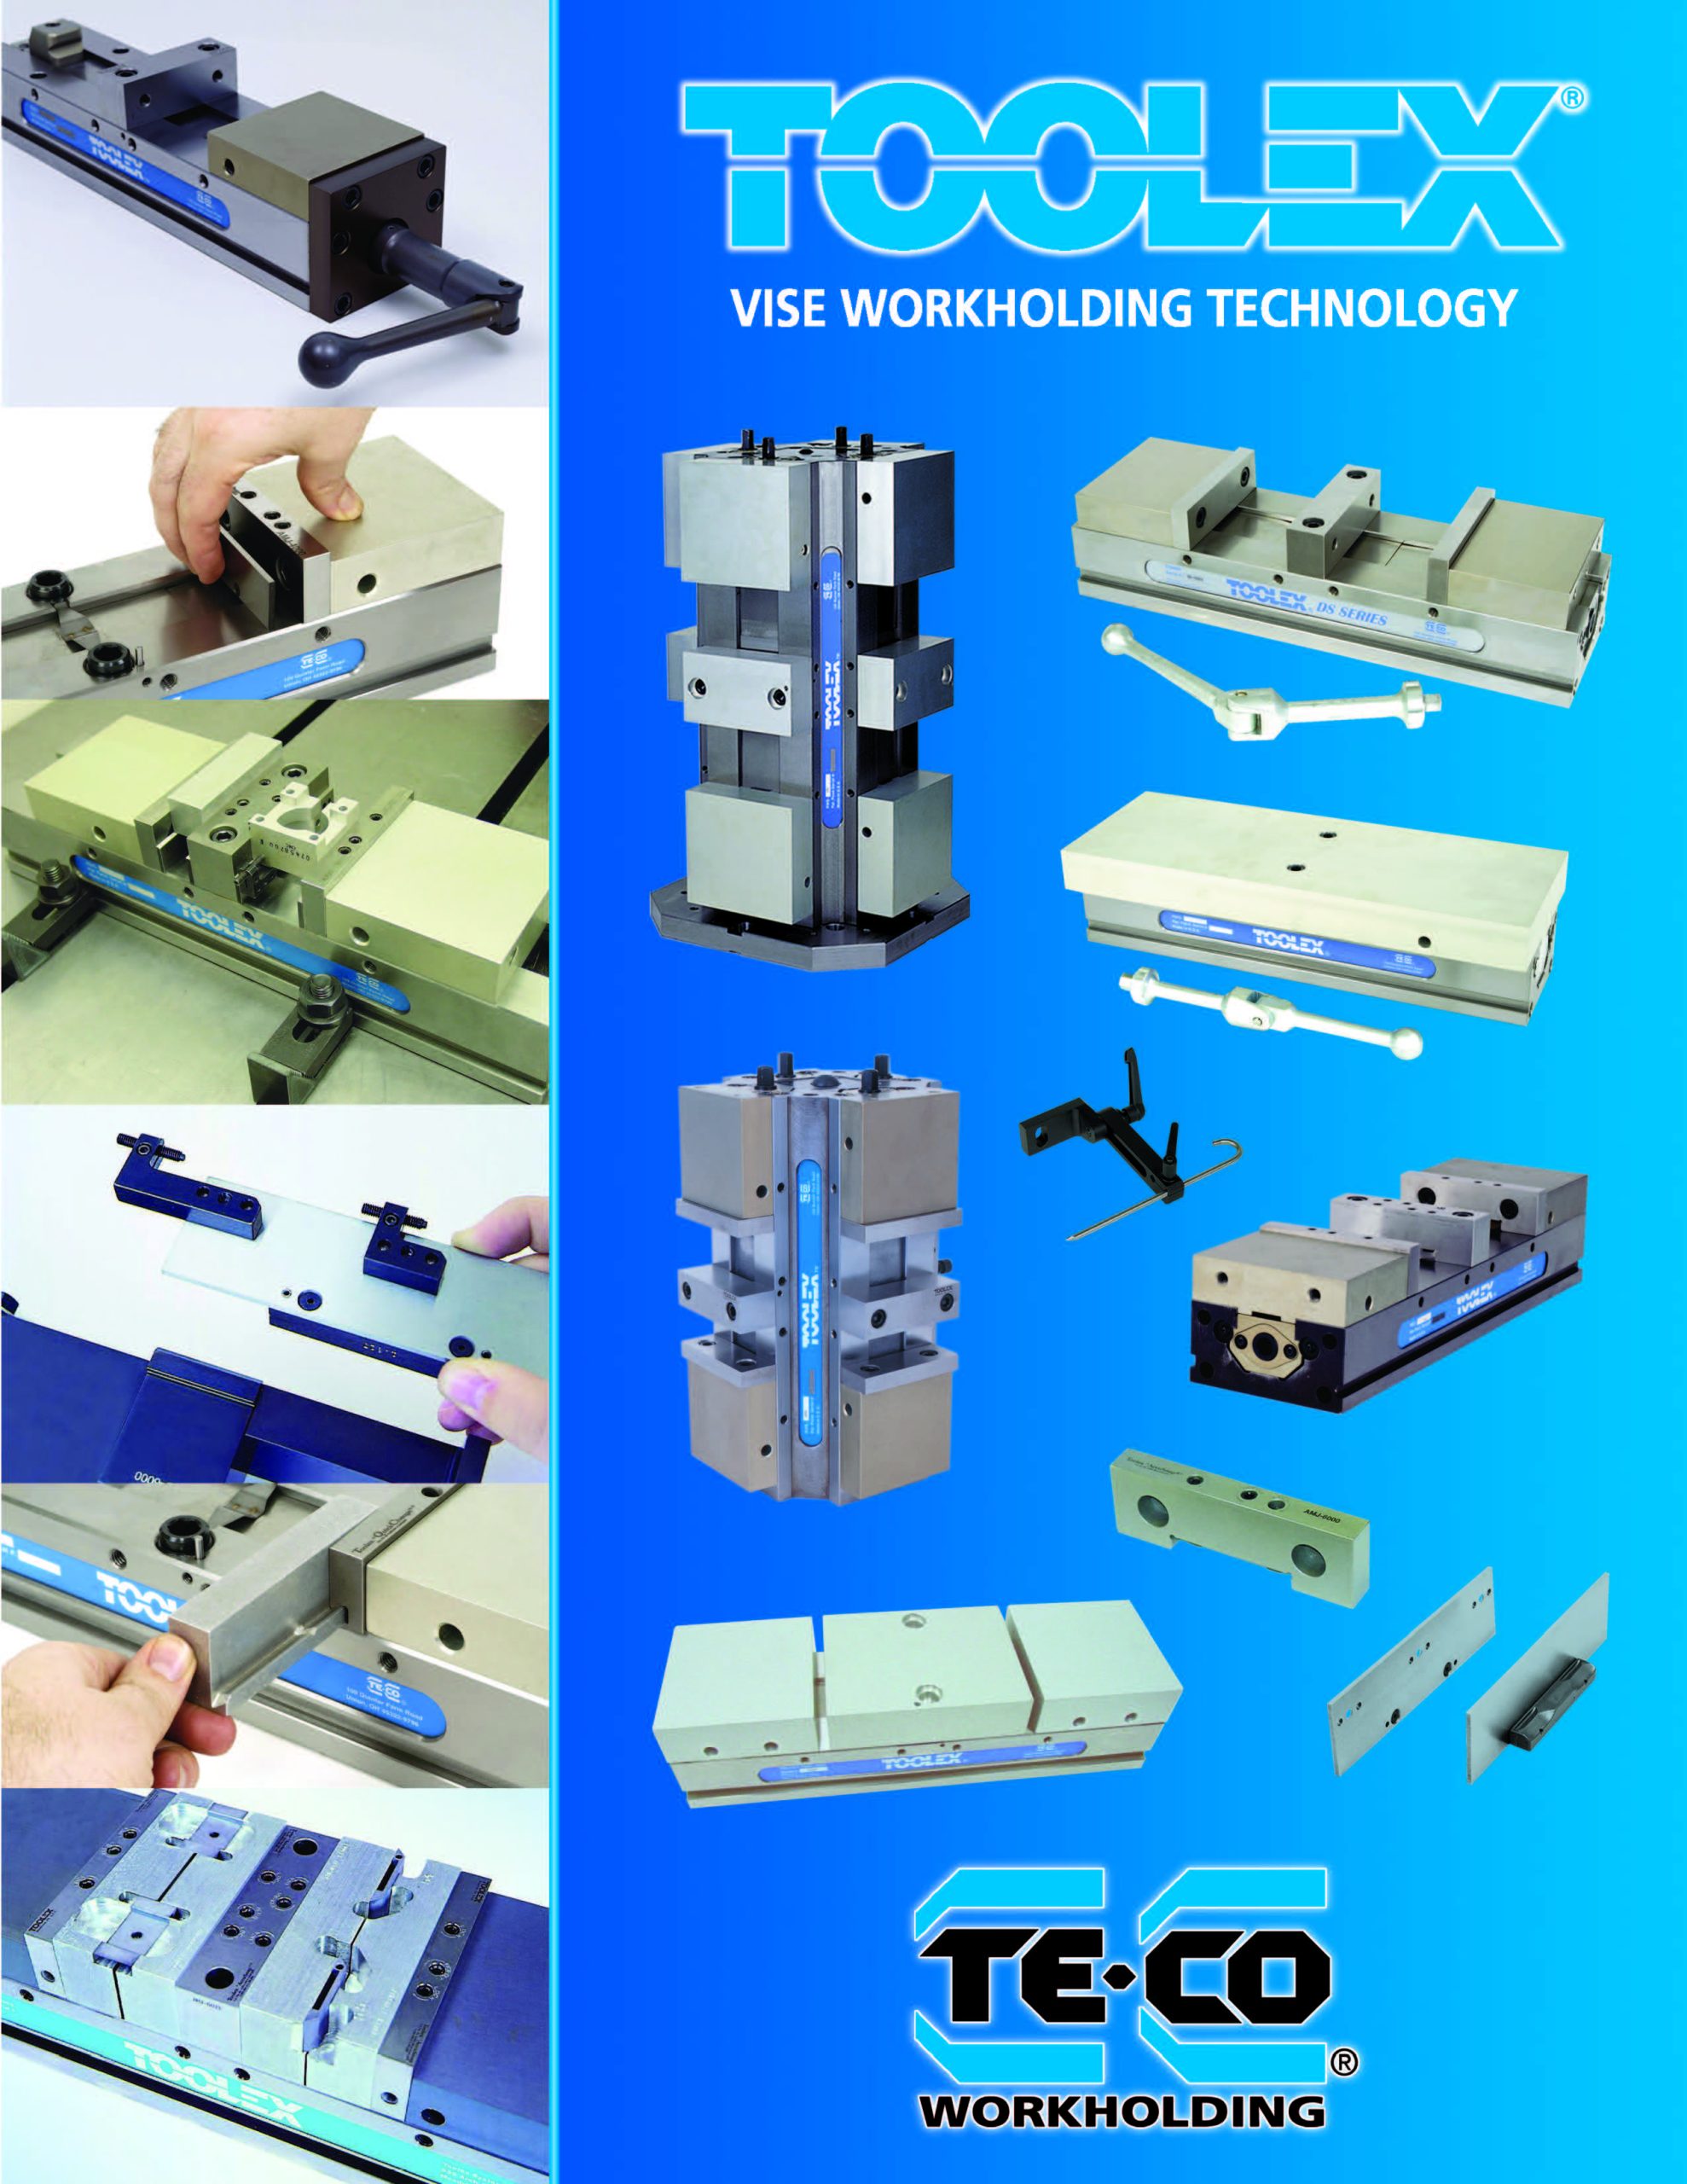 a poster for toolex vise workholding technology